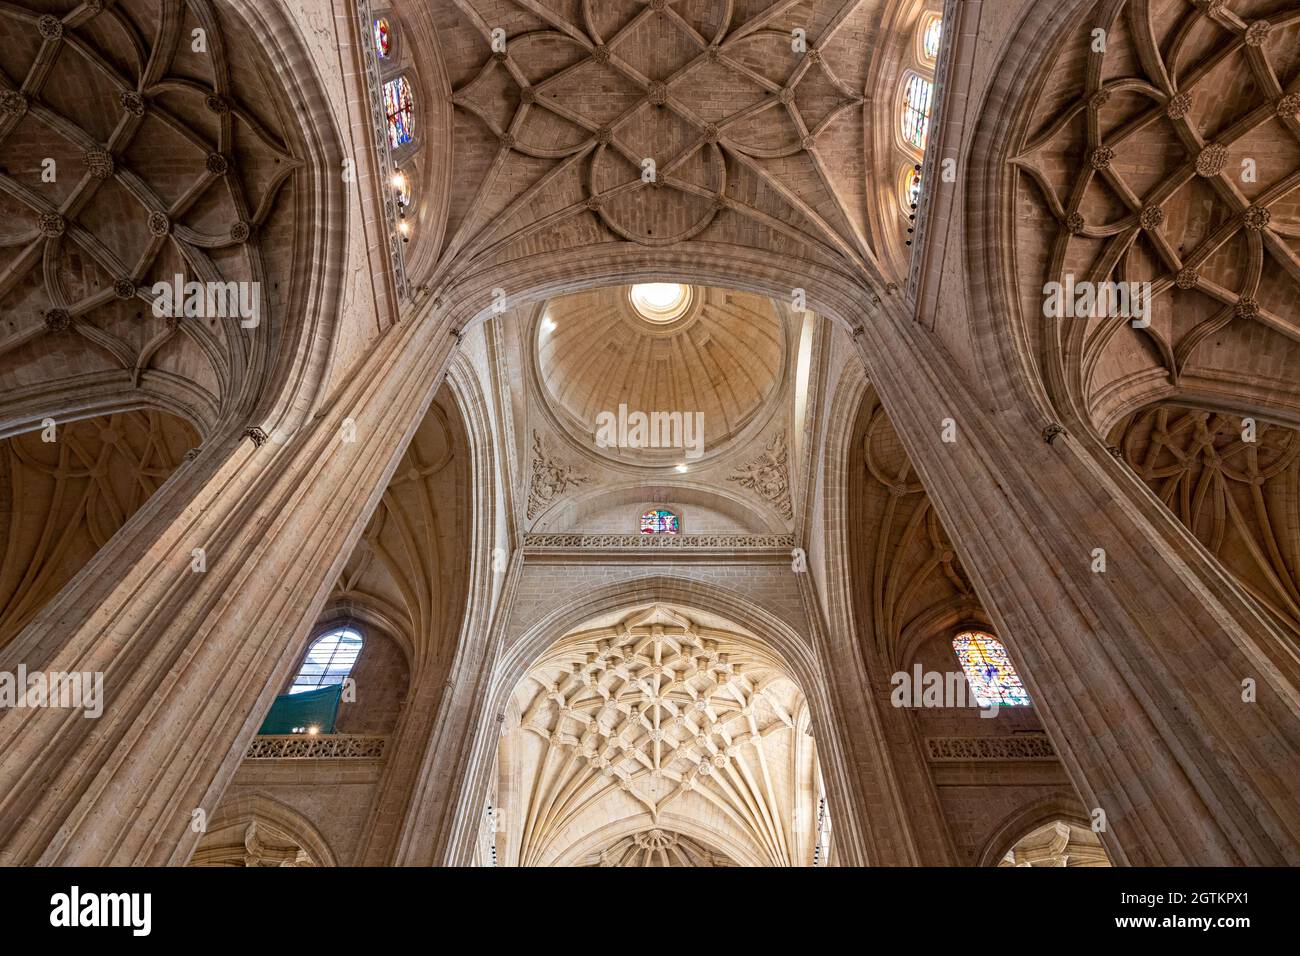 Segovia, Spain. Gothic ribbed vaults and Renaissance crossing inside Segovia Cathedral Stock Photo